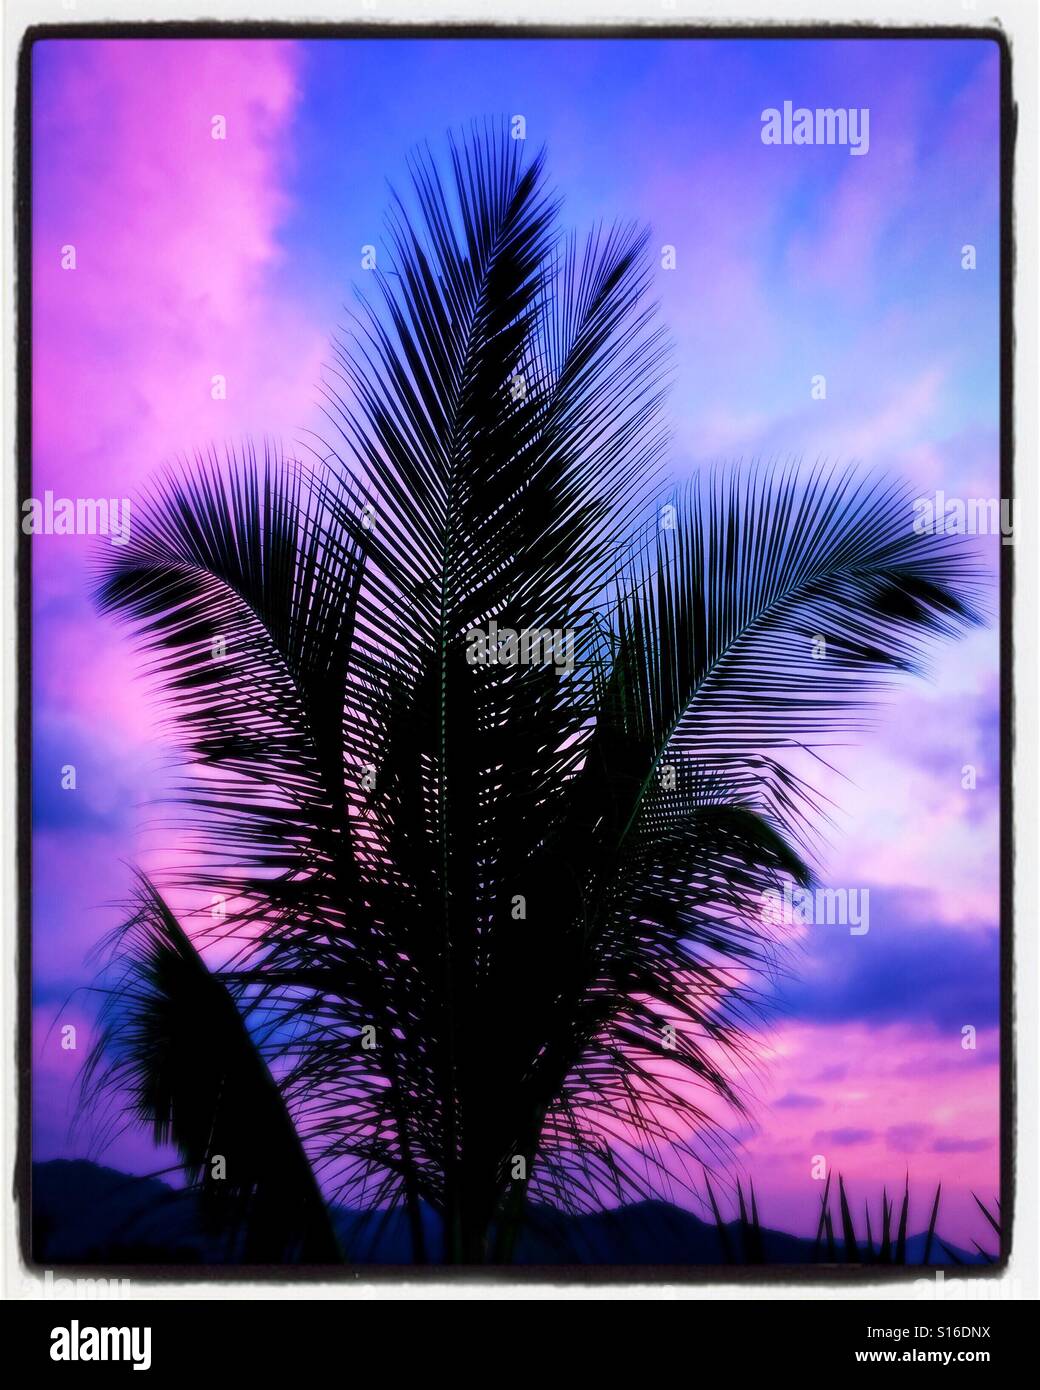 Palm fronds dance against a sky painted in beautiful shades of pink and blue. Stock Photo